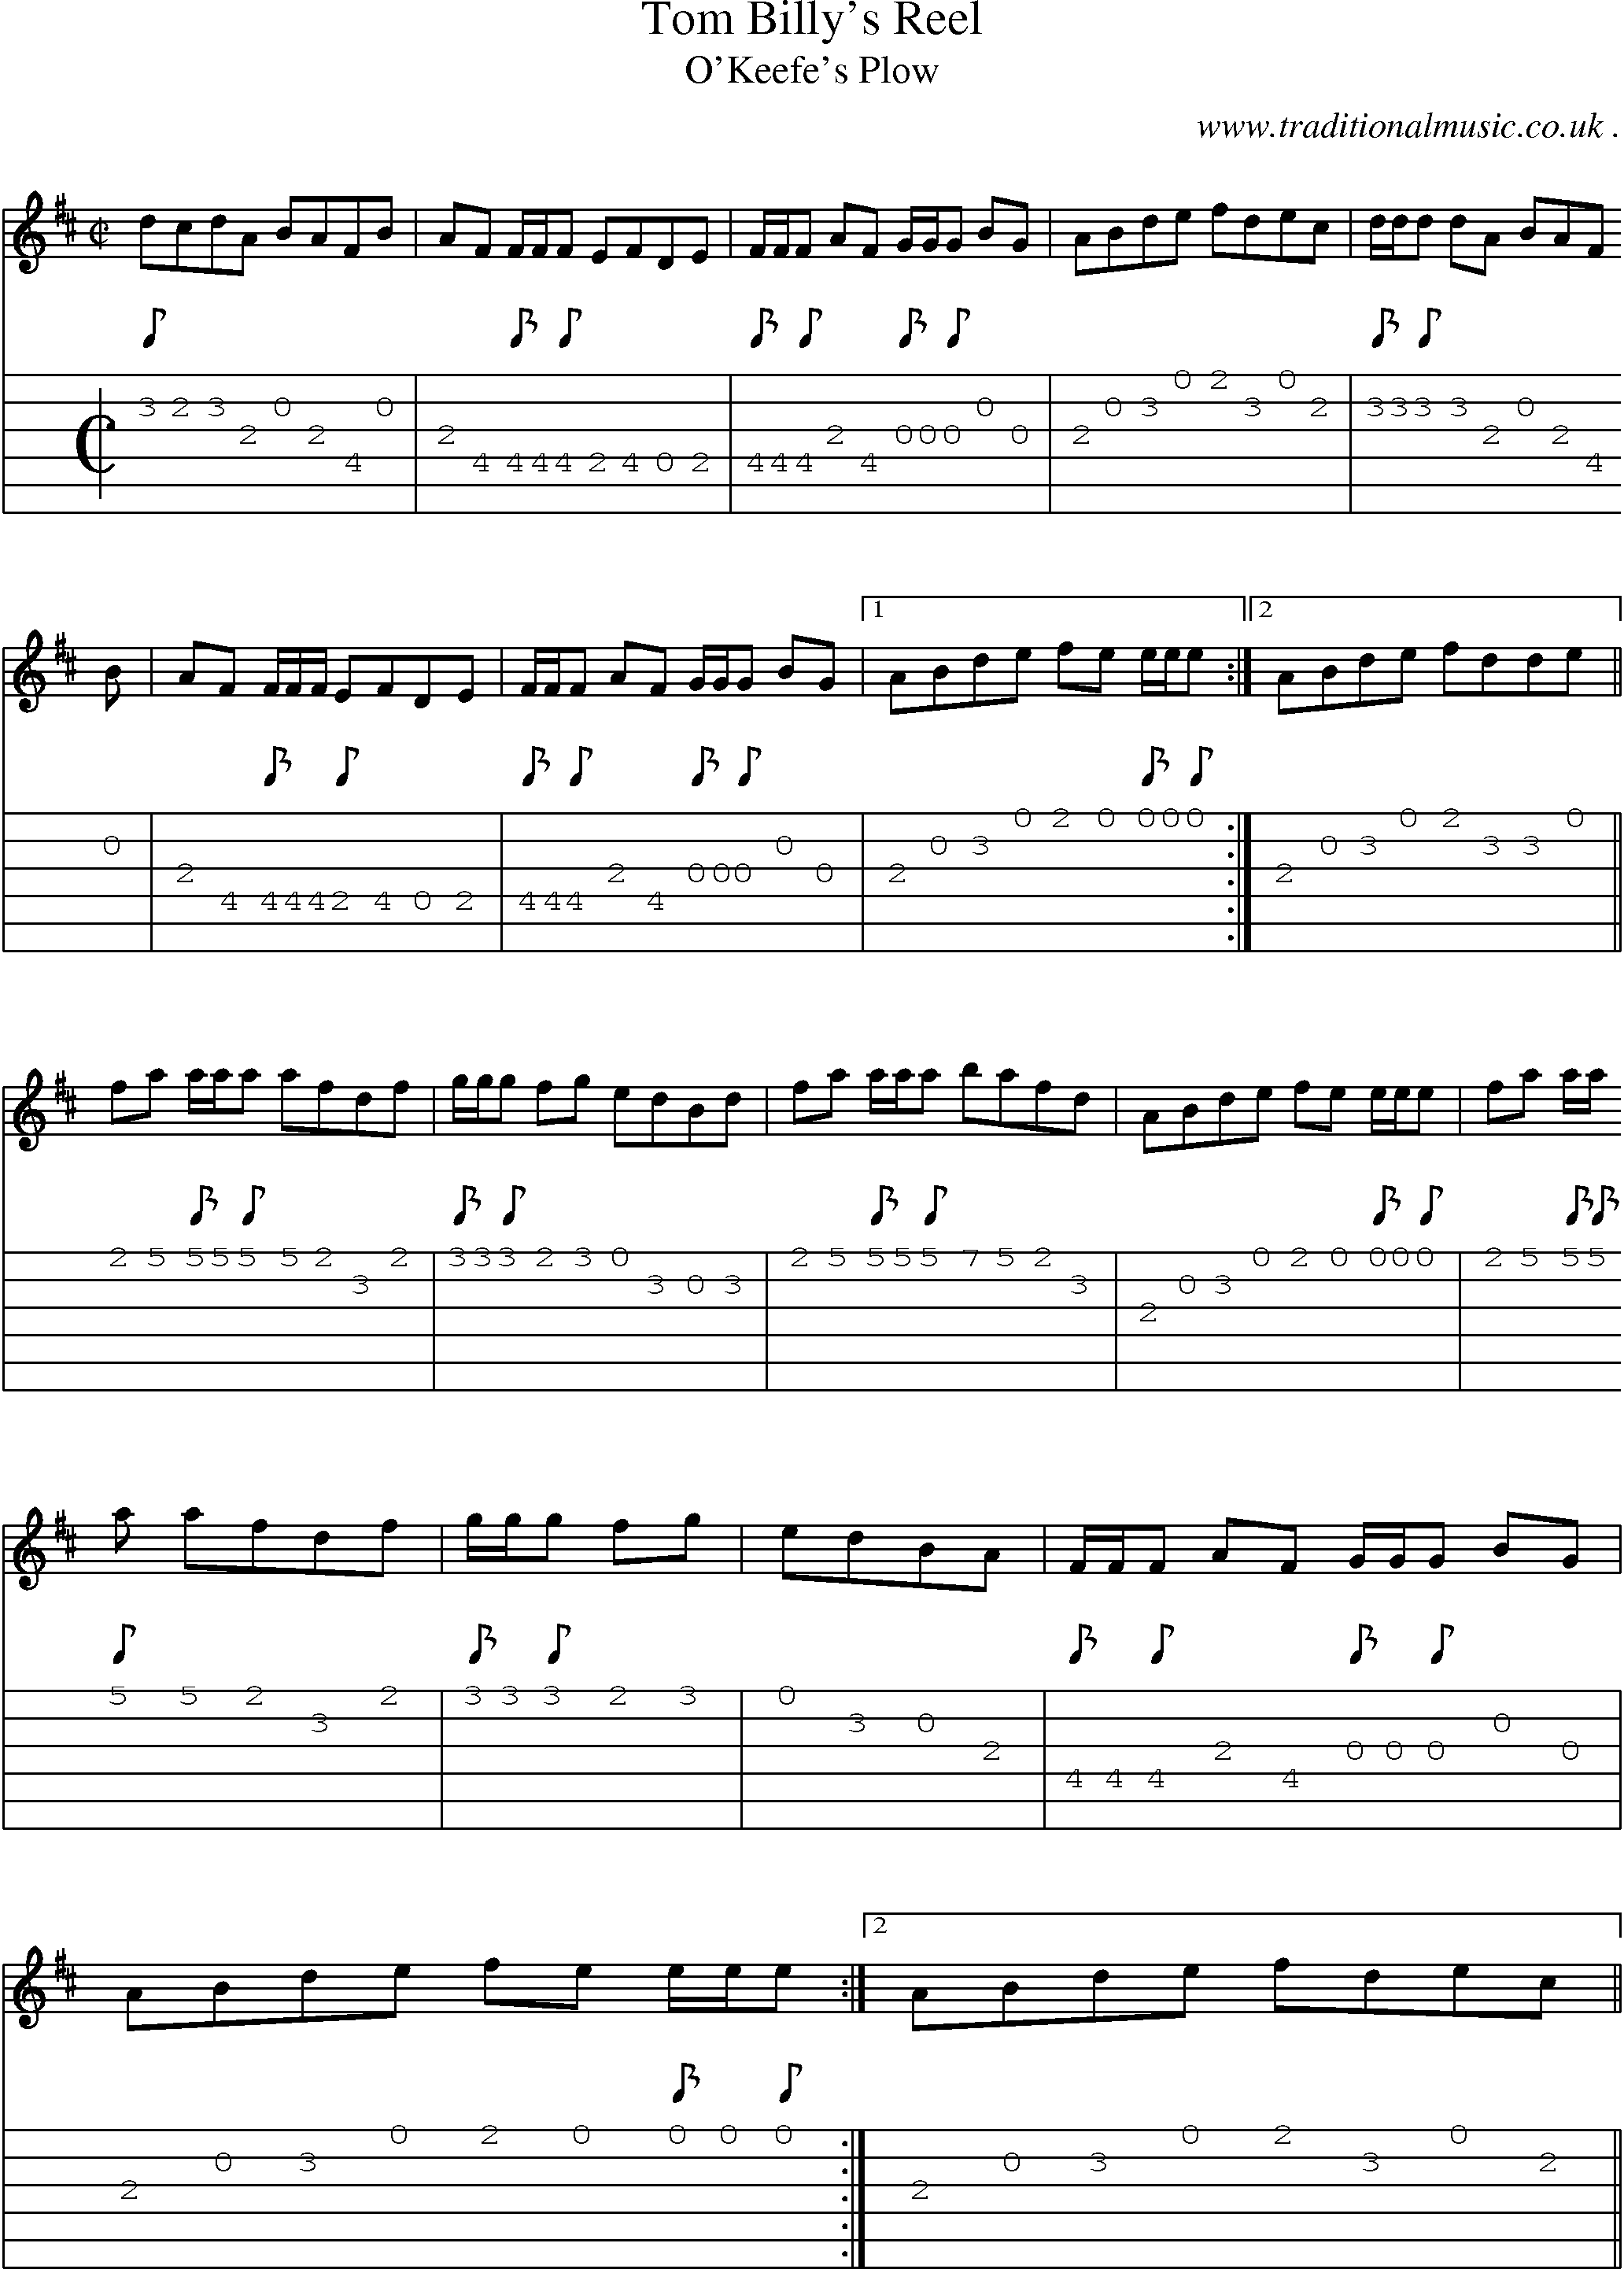 Sheet-Music and Guitar Tabs for Tom Billys Reel